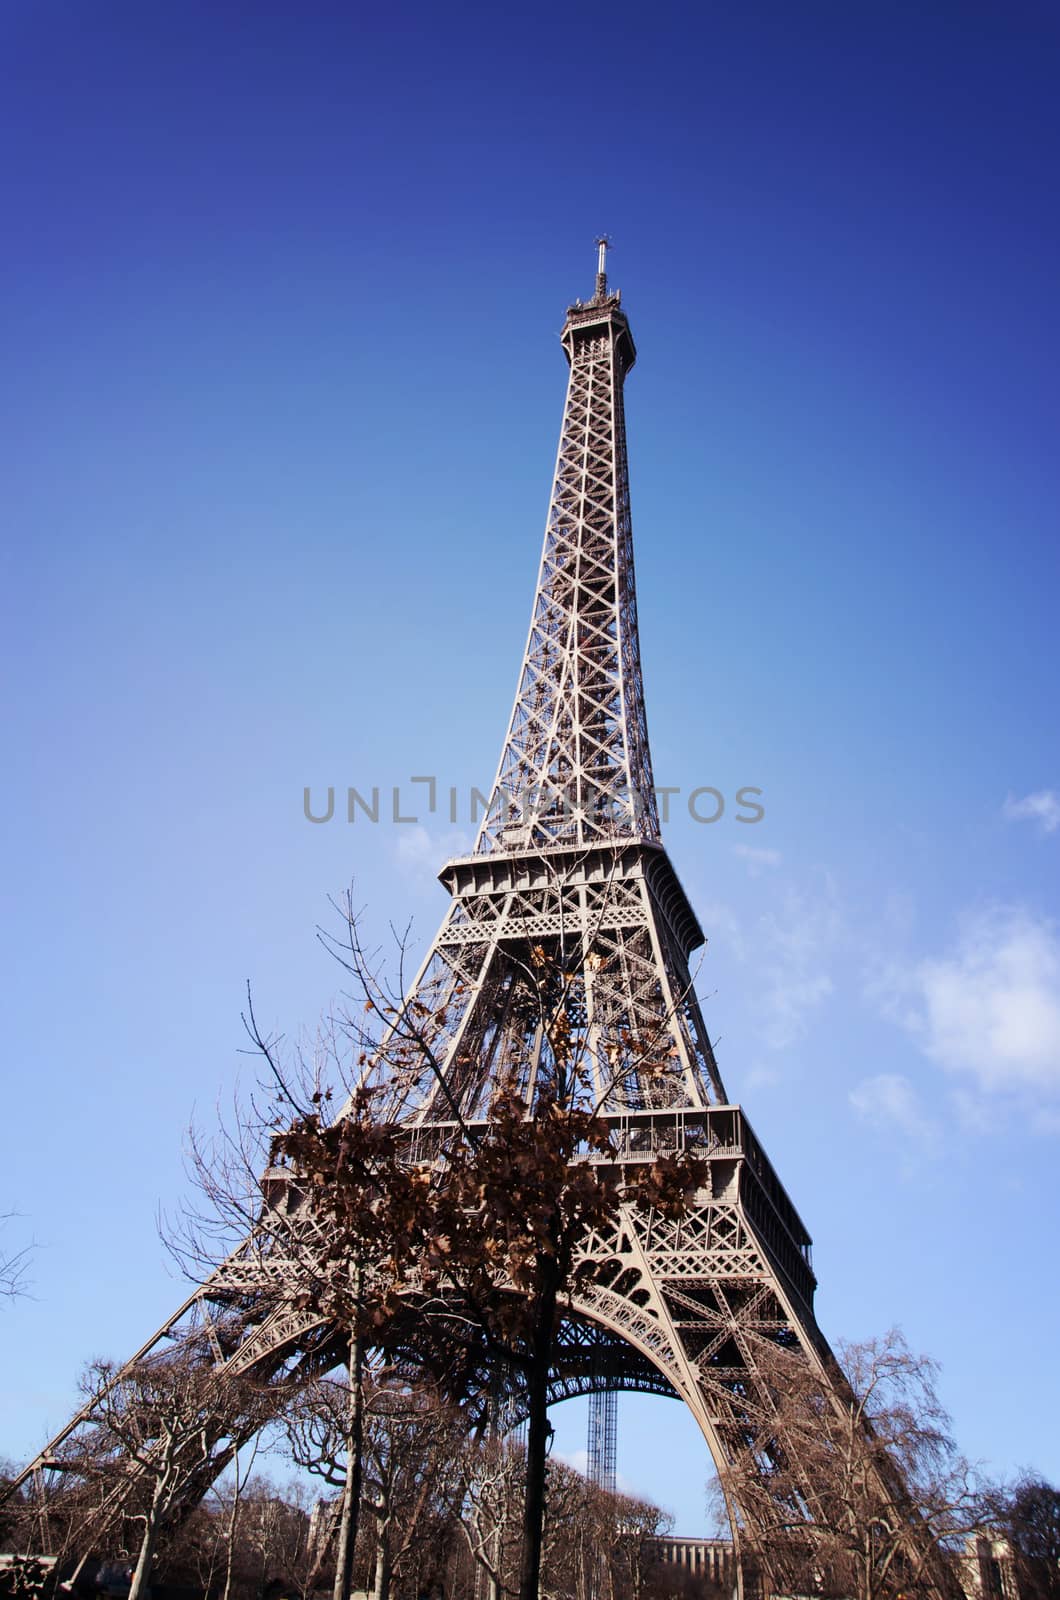 Eiffel Tower in Paris by aoo3771